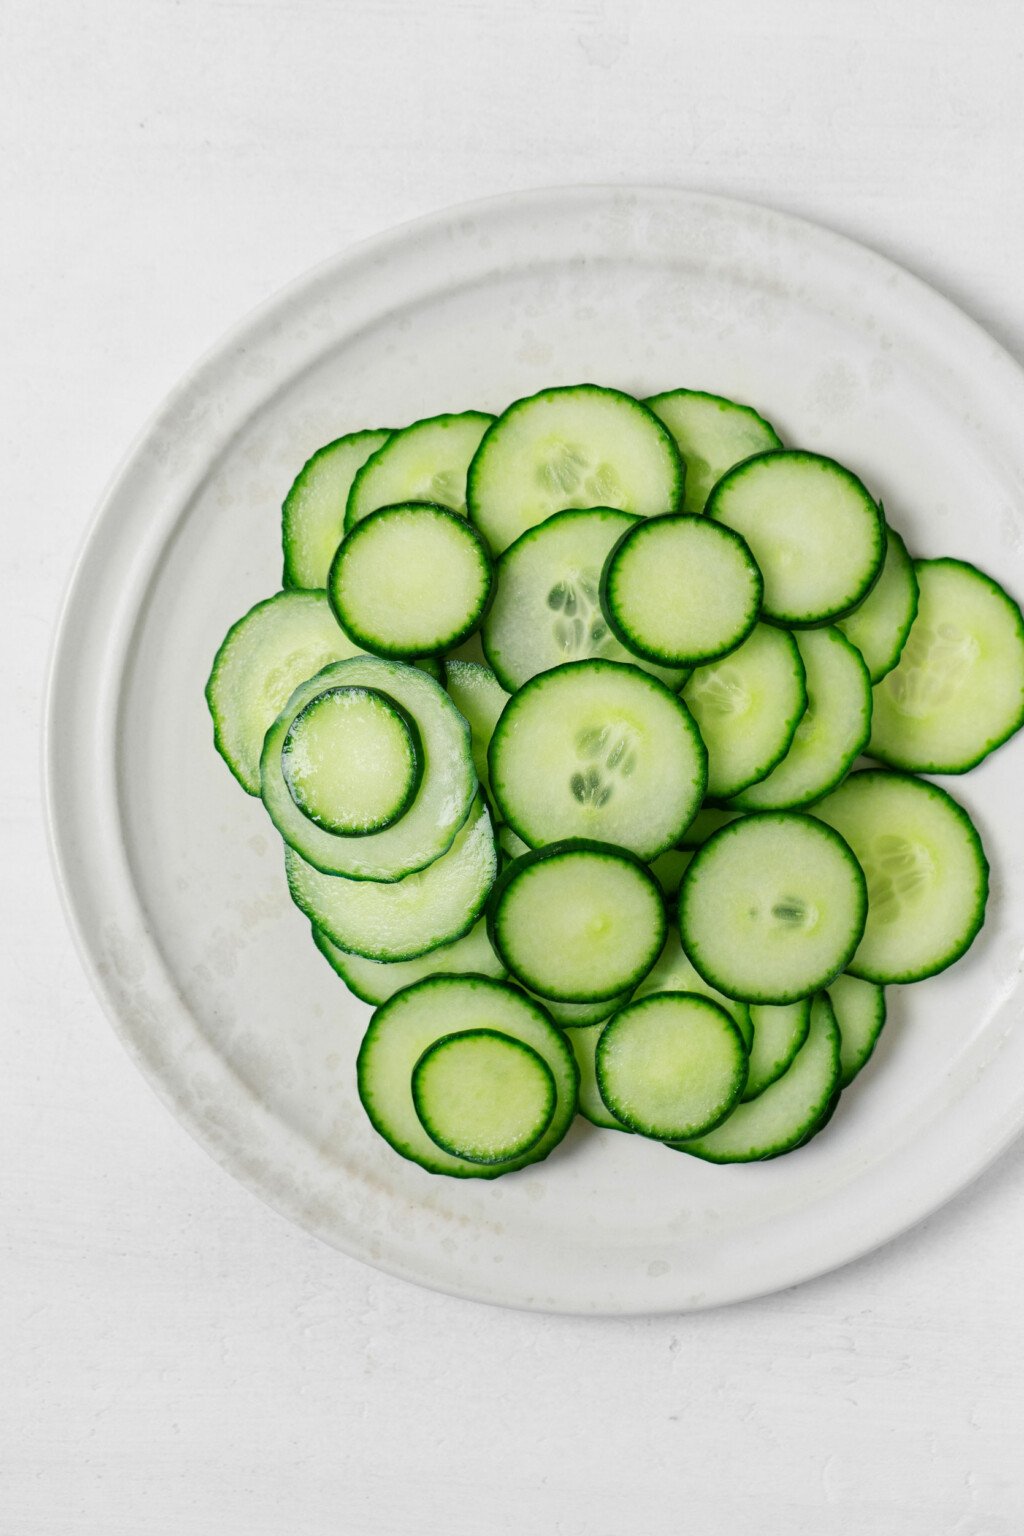 Crosswise sliced cucumbers are resting on a white plate.